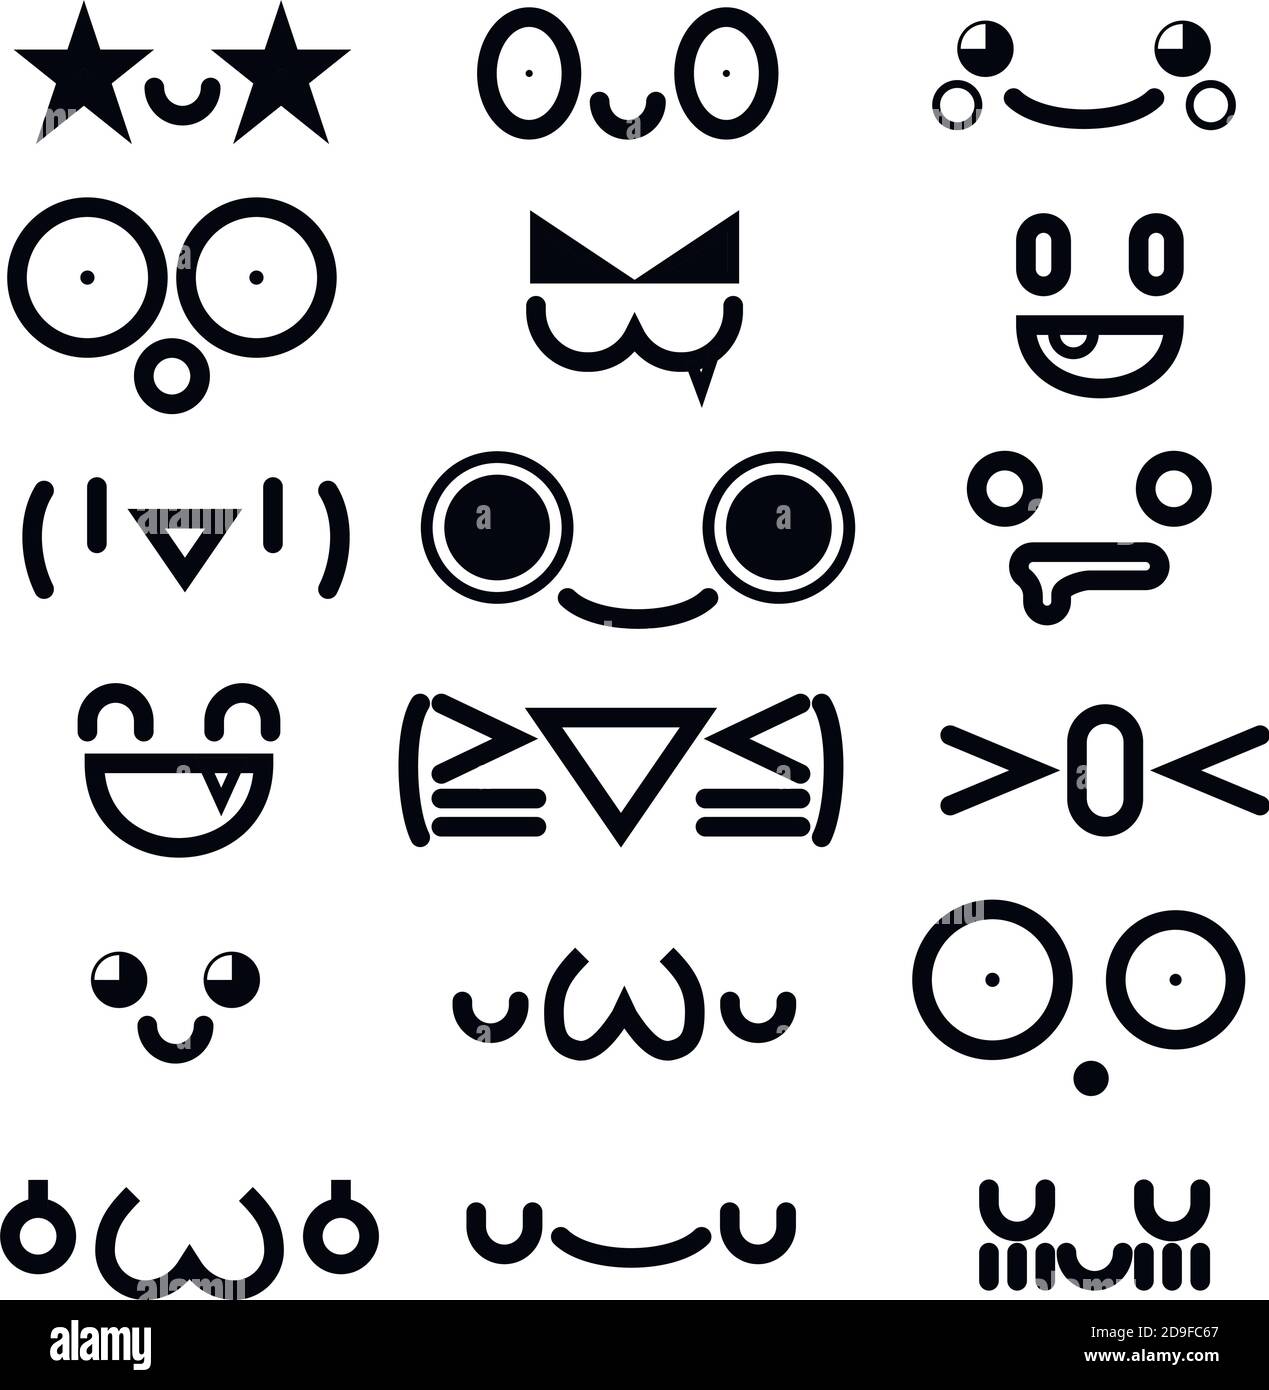 cute kawaii emoticon face collection isolated on white background. Stock Vector